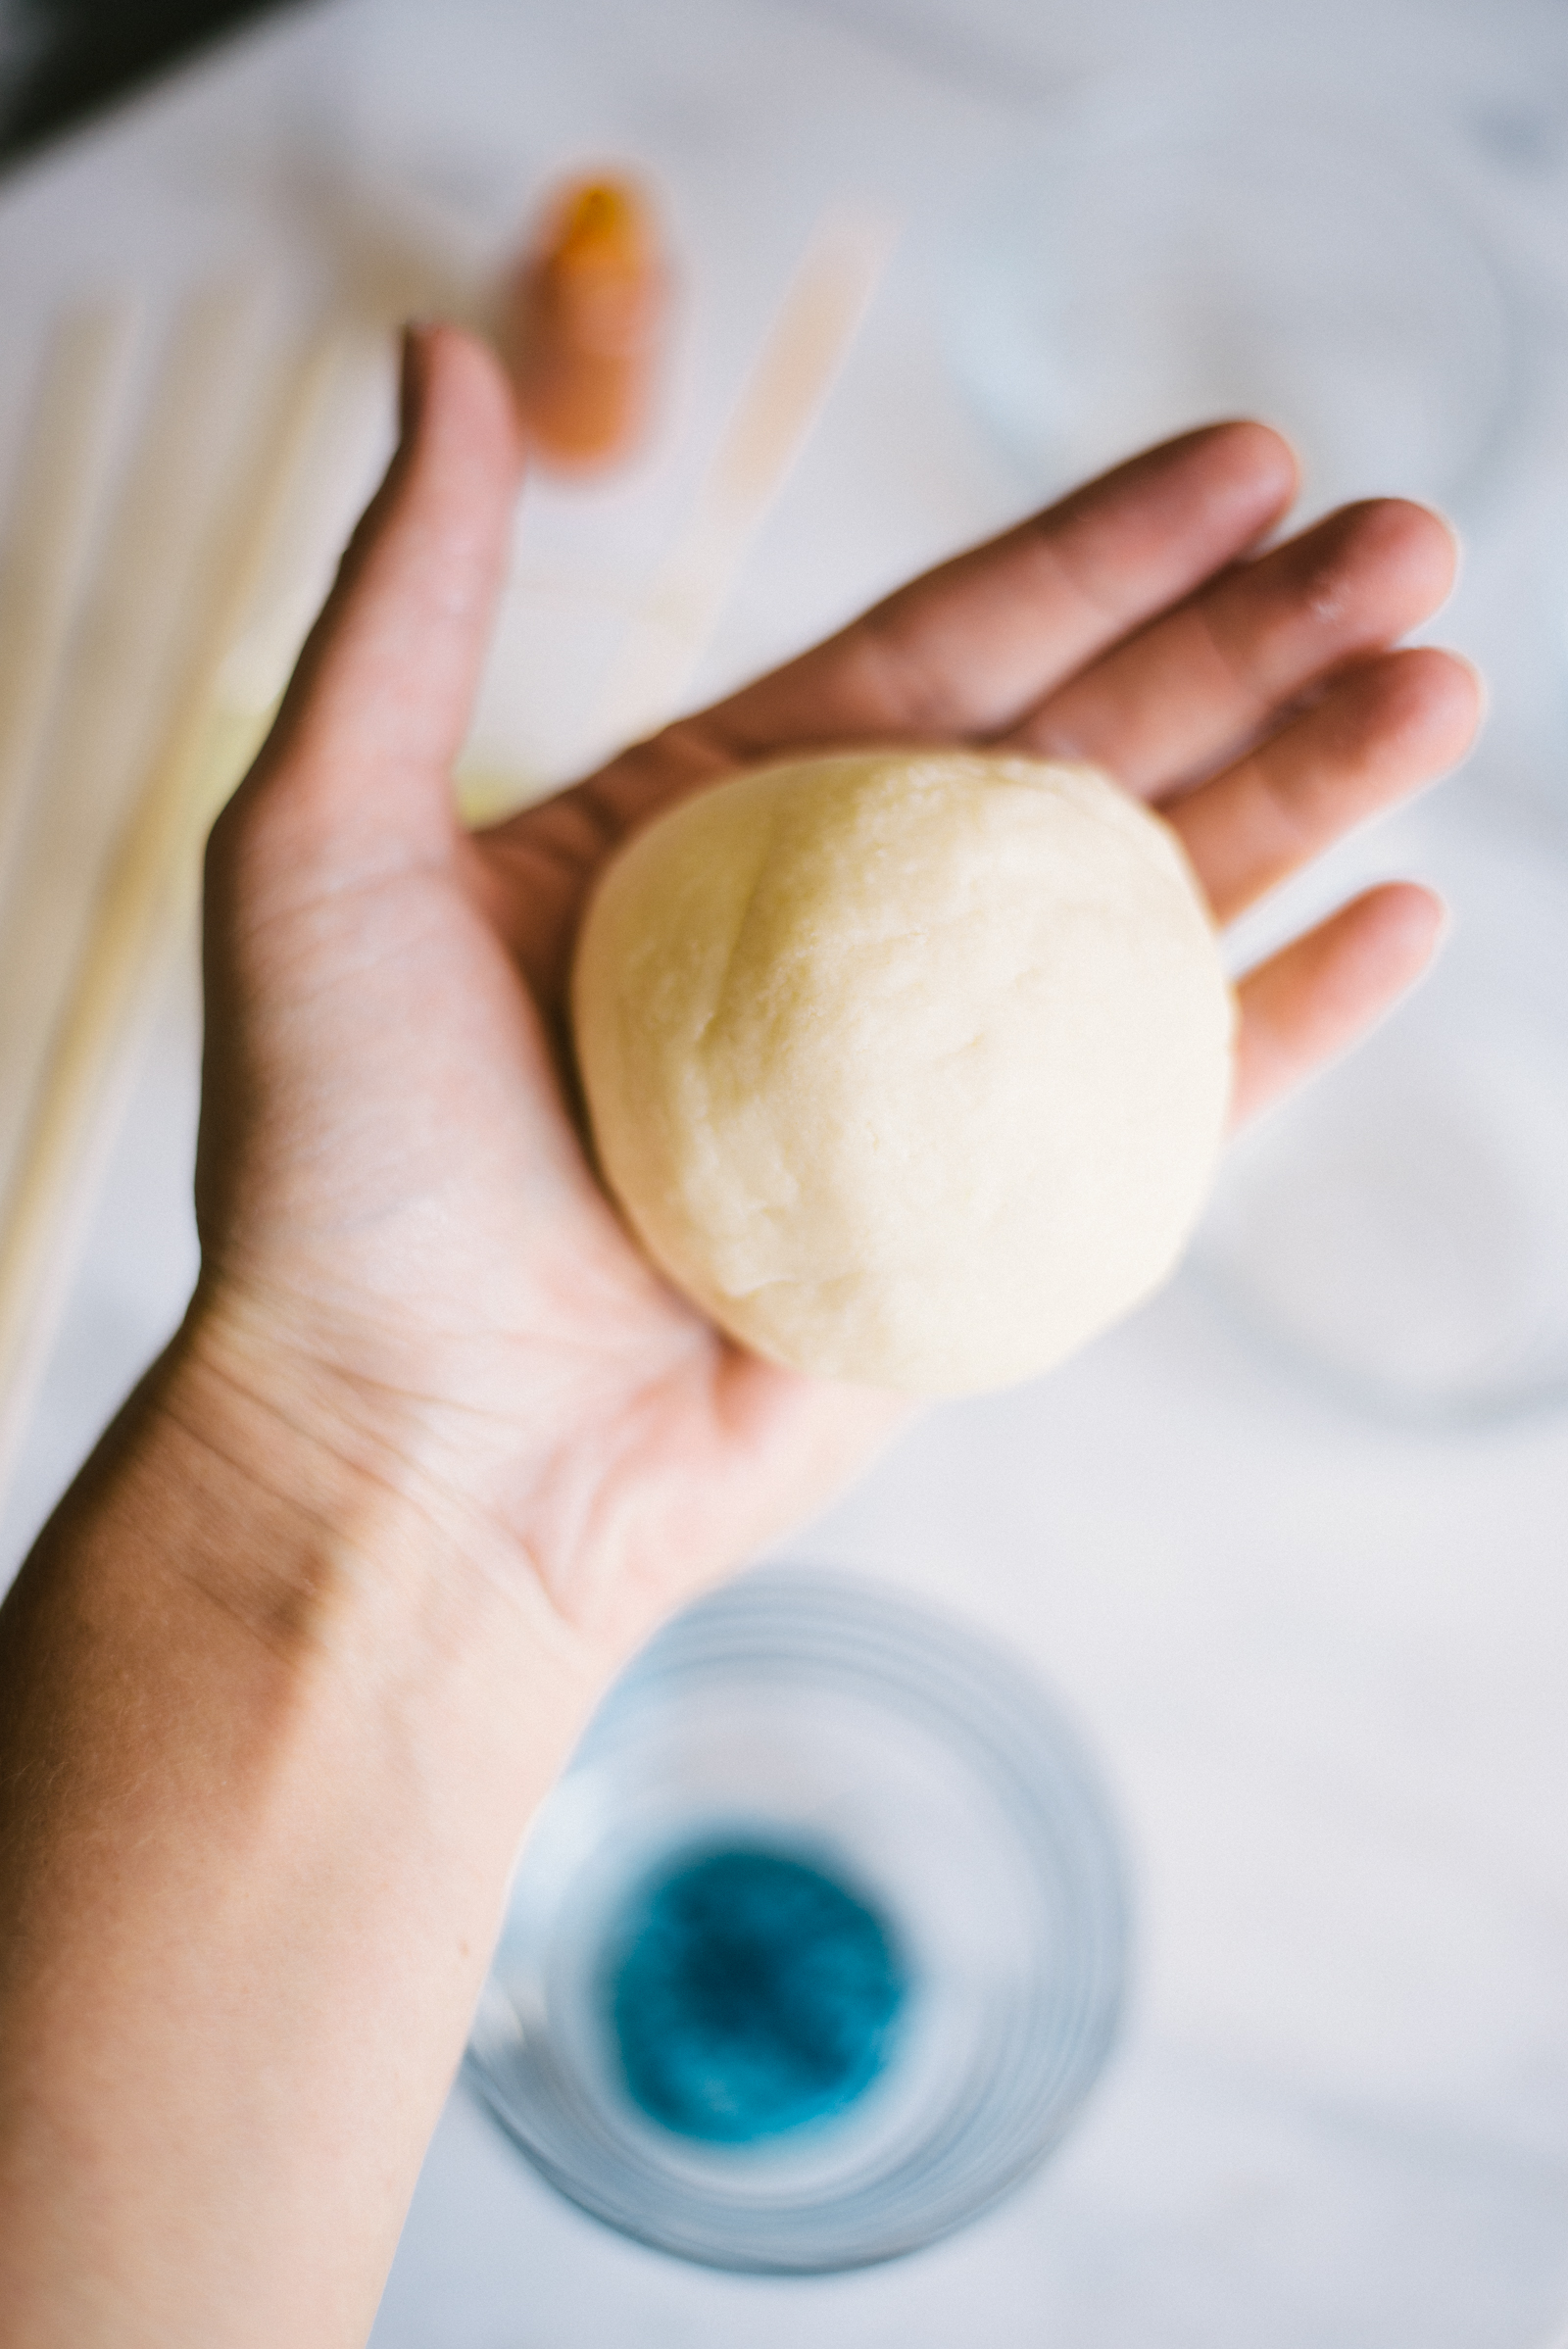 home made play dough rolled into a ball in hand